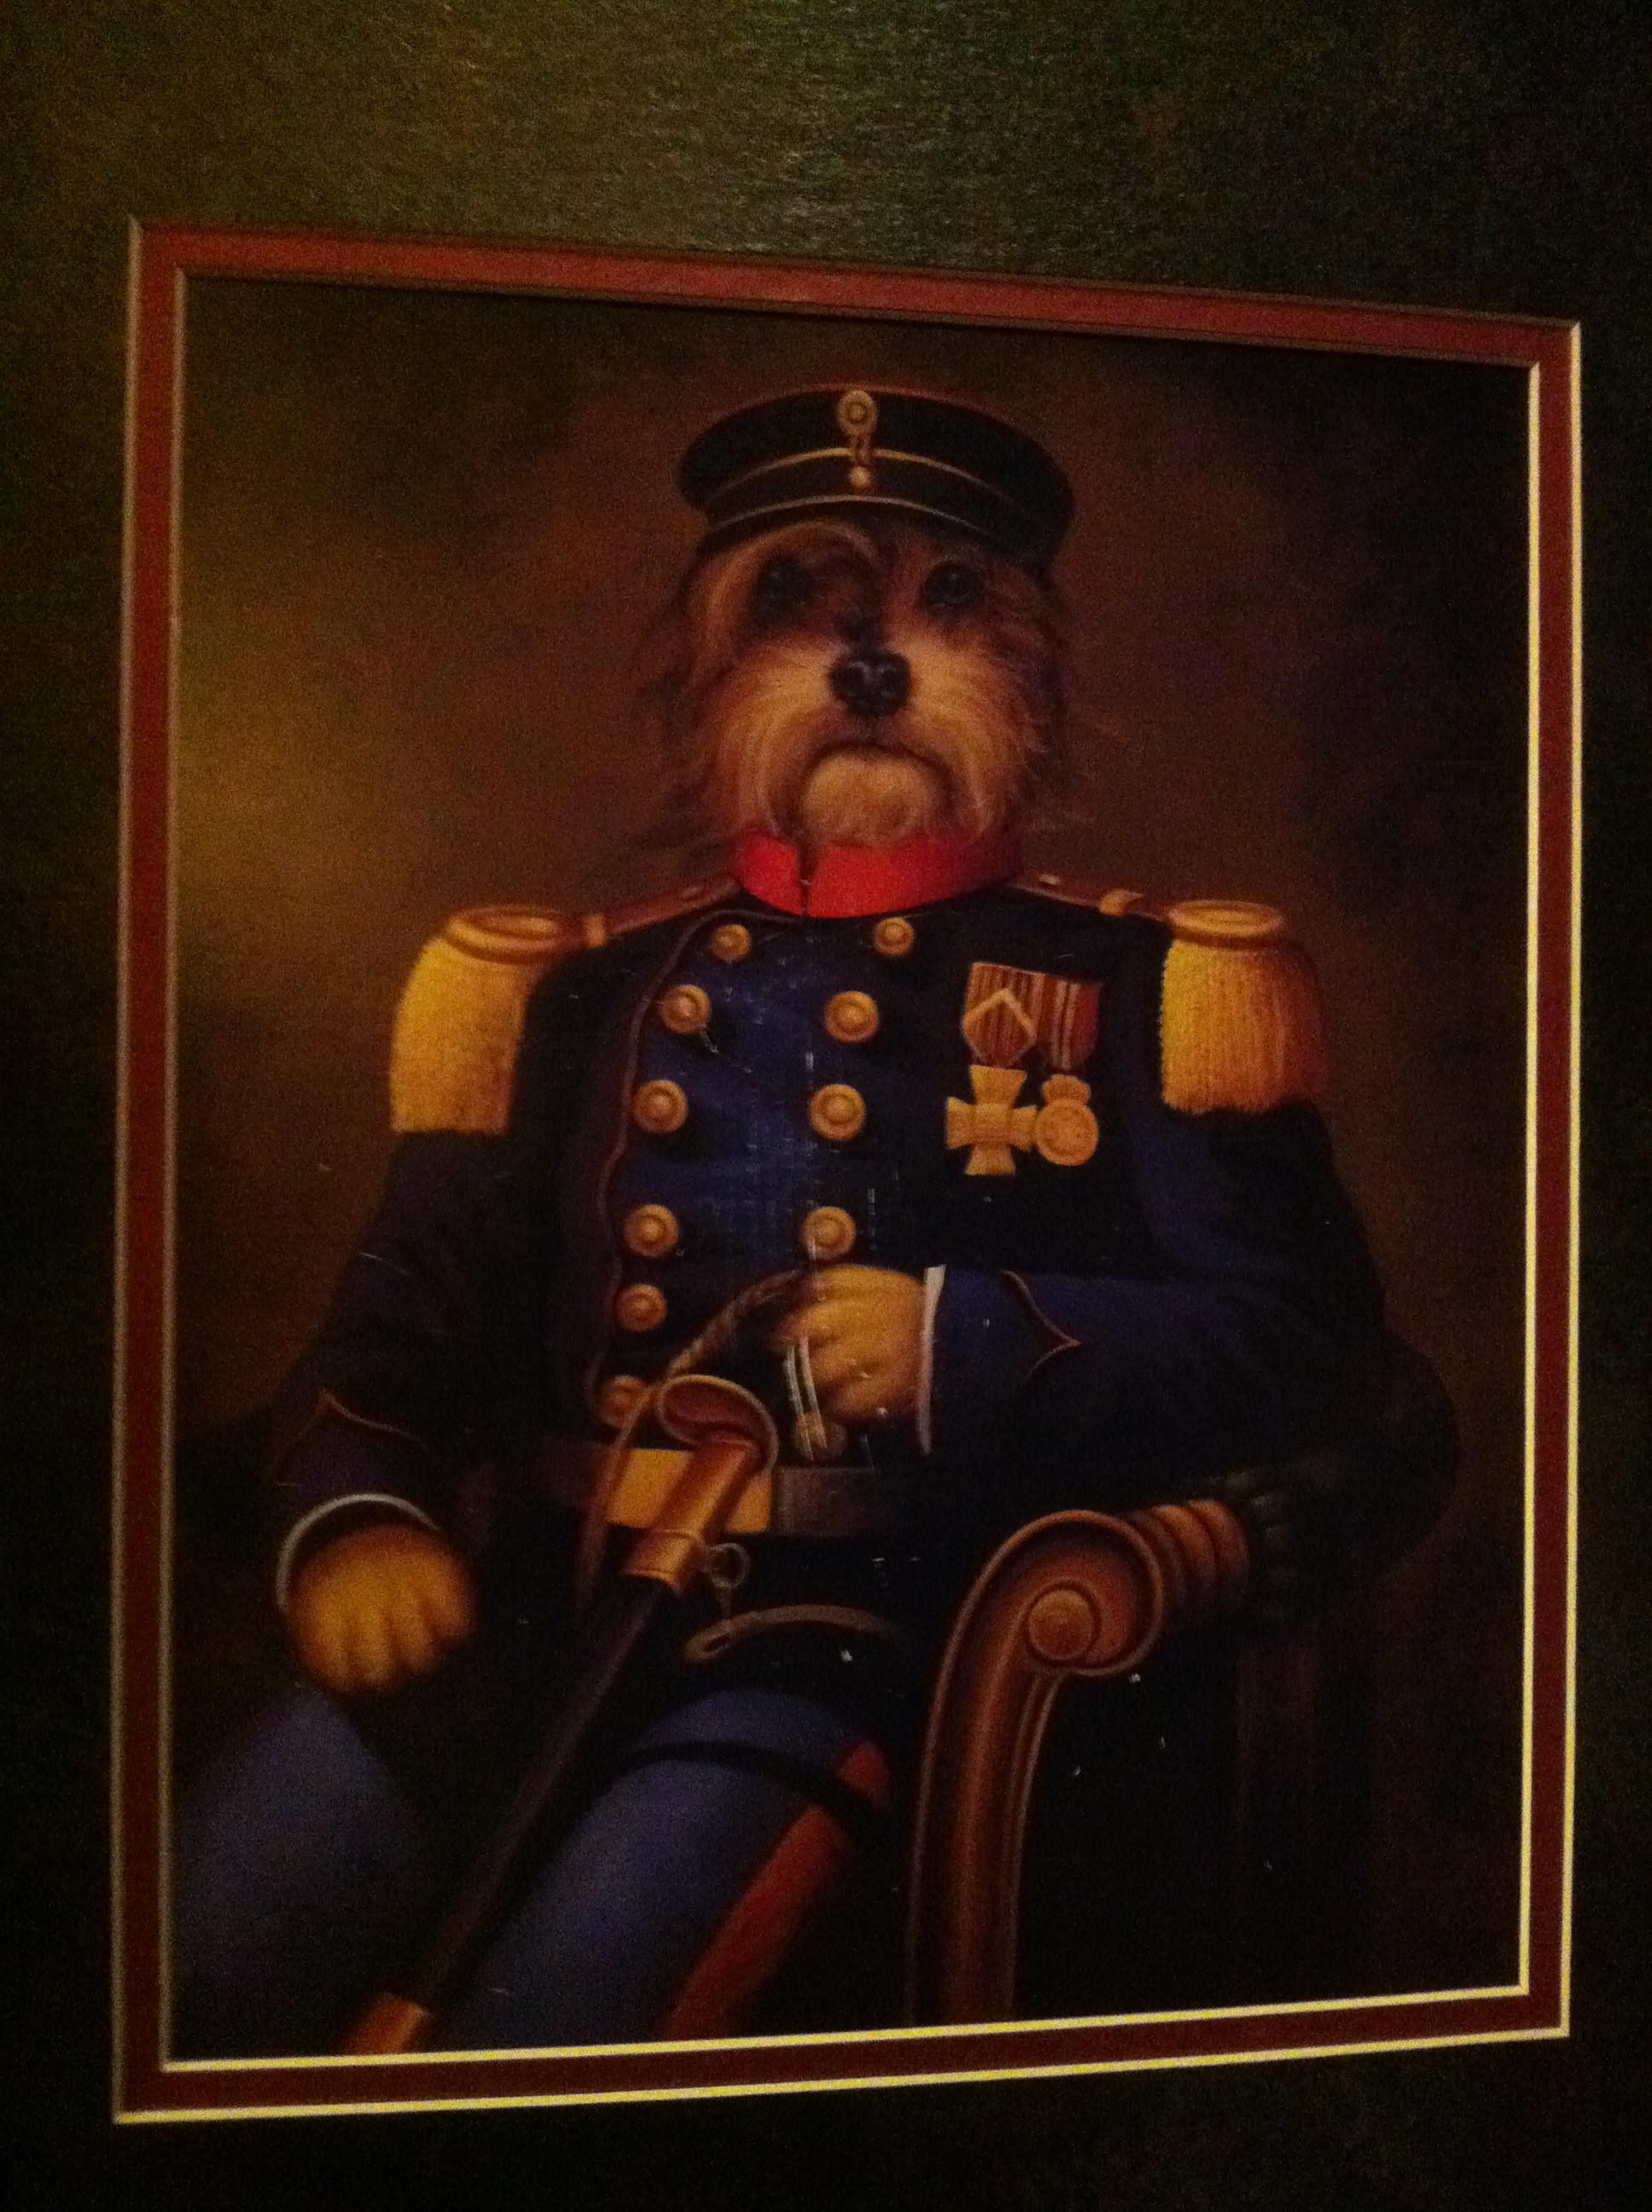 dog portrait painted as a human in military uniform